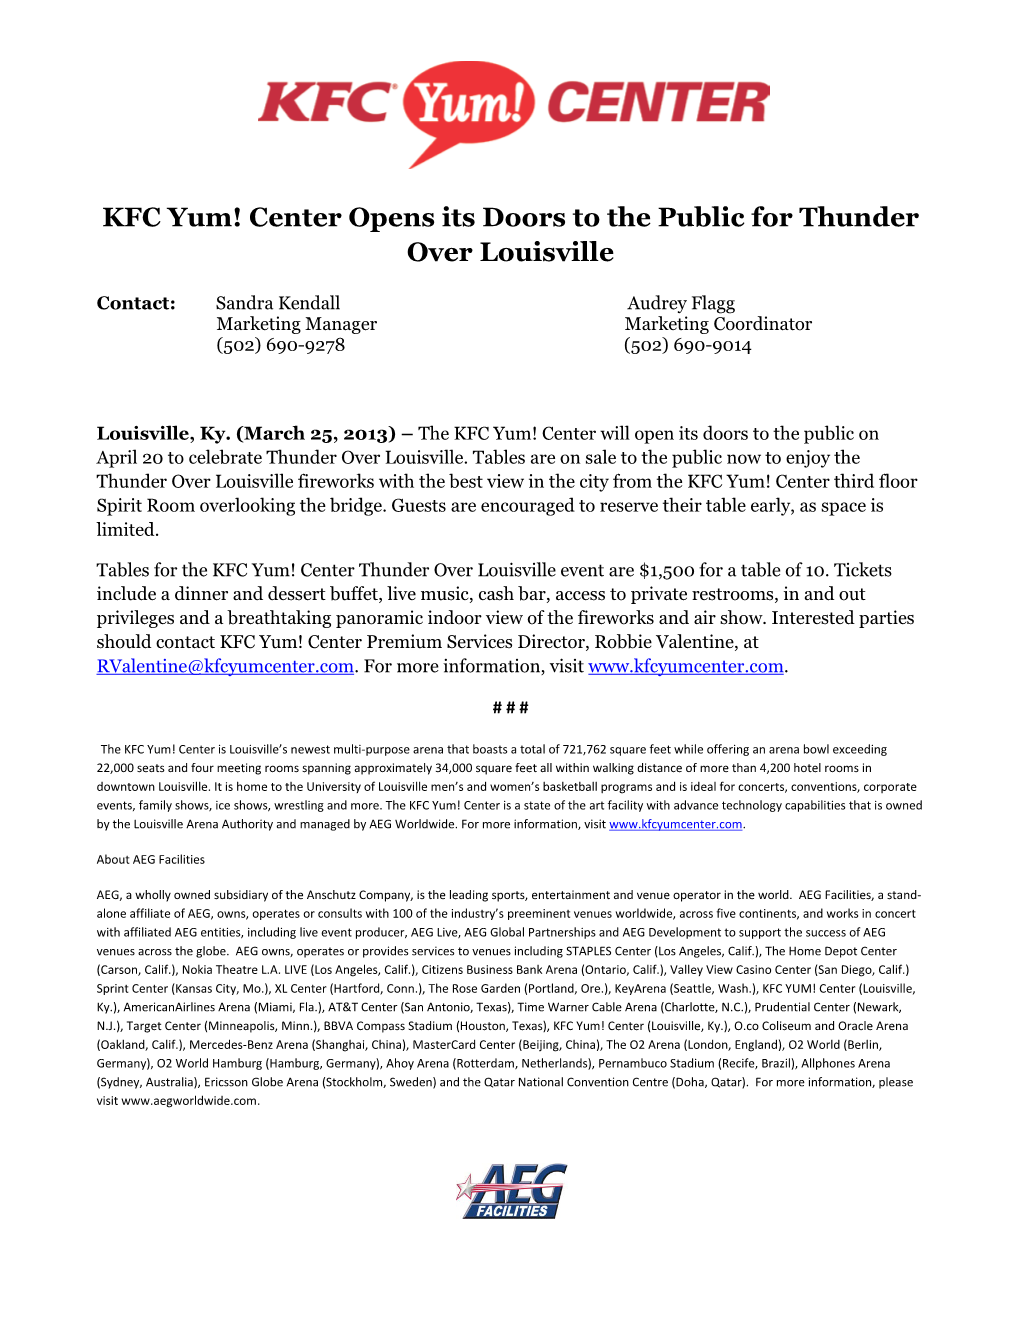 KFC Yum! Center Opens Its Doors to the Public for Thunder Over Louisville